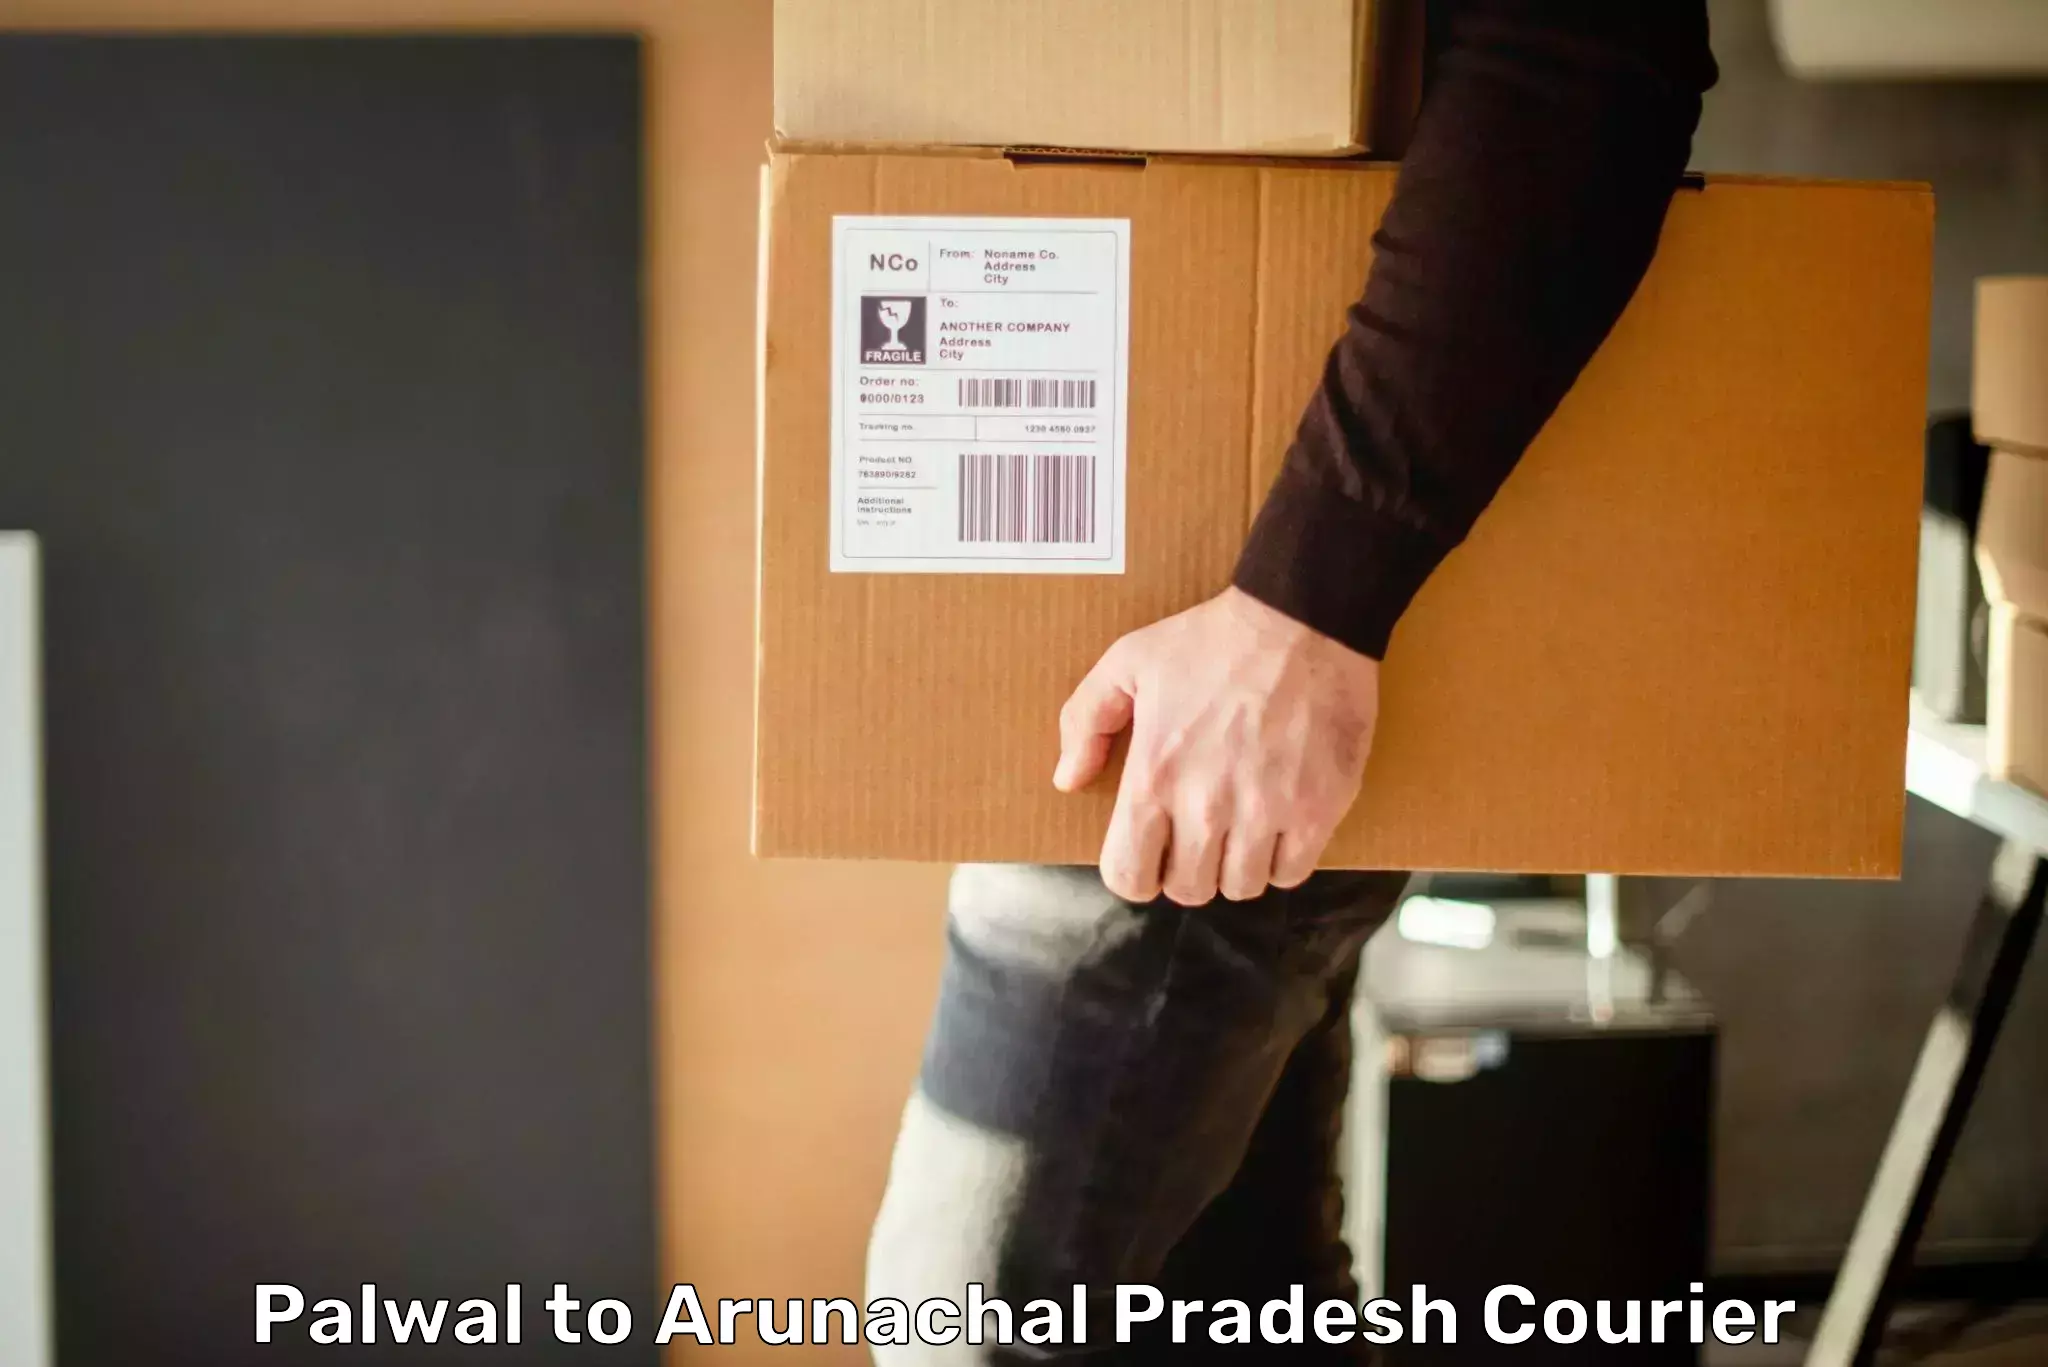 Parcel service for businesses Palwal to Arunachal Pradesh